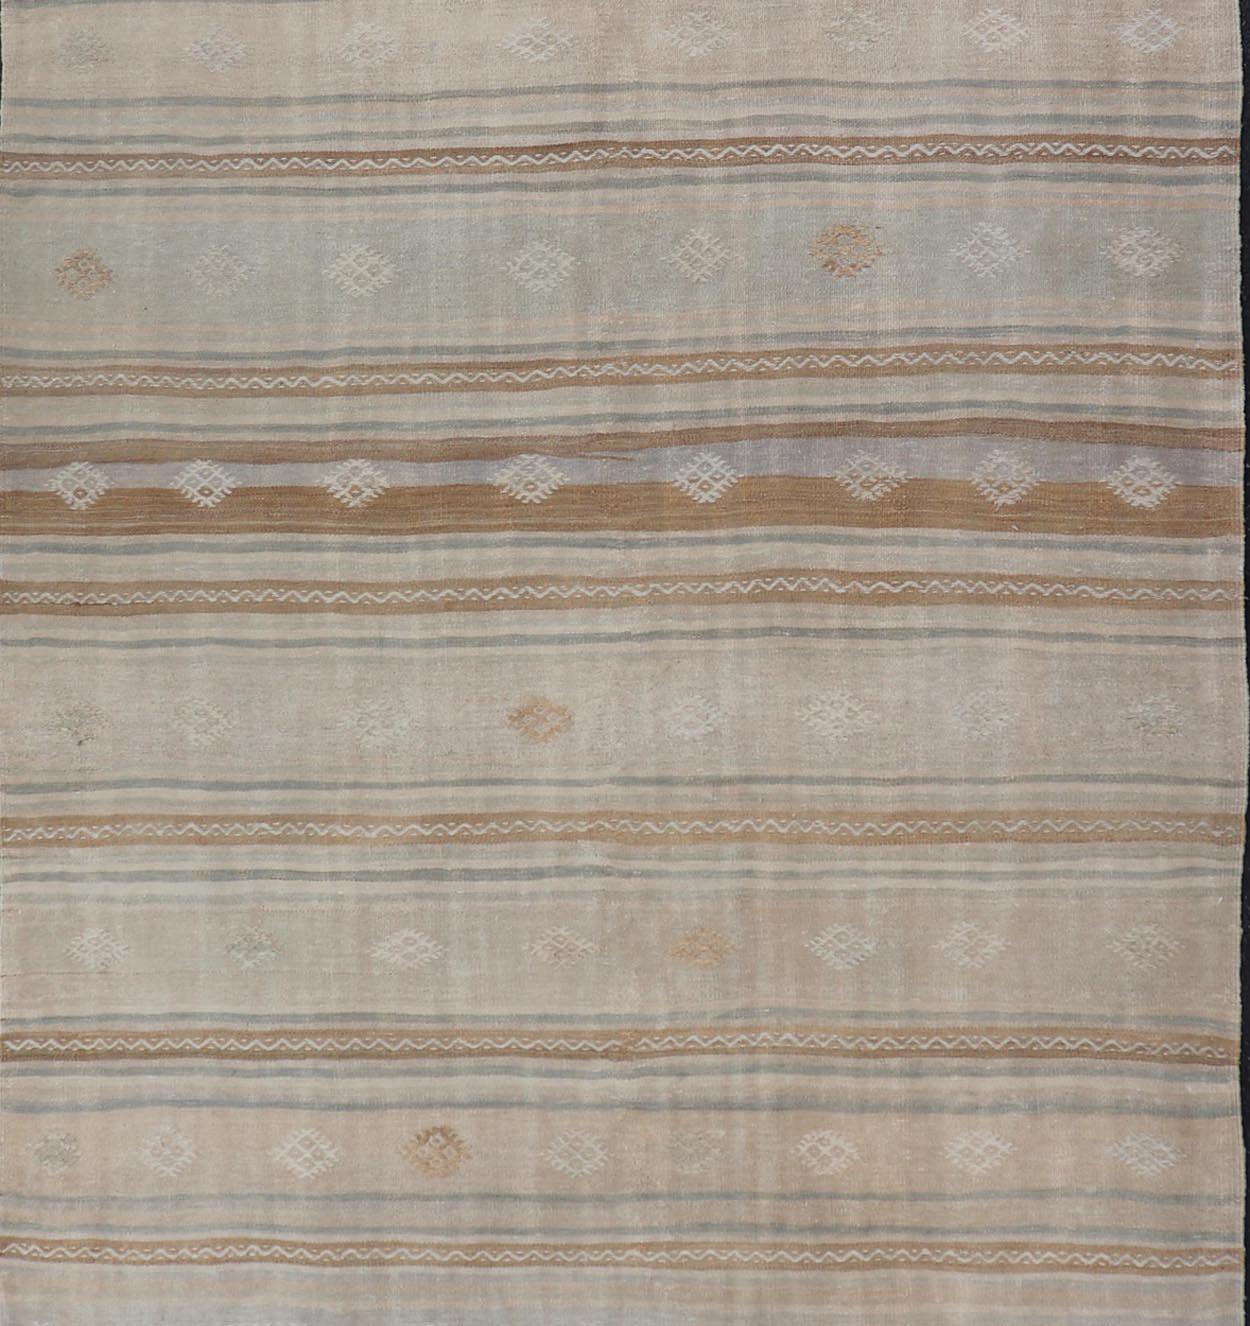 Turkish Flat-Weave Embroideries Kilim in Tan, Taupe, Brown and a Soft Blue In Good Condition For Sale In Atlanta, GA